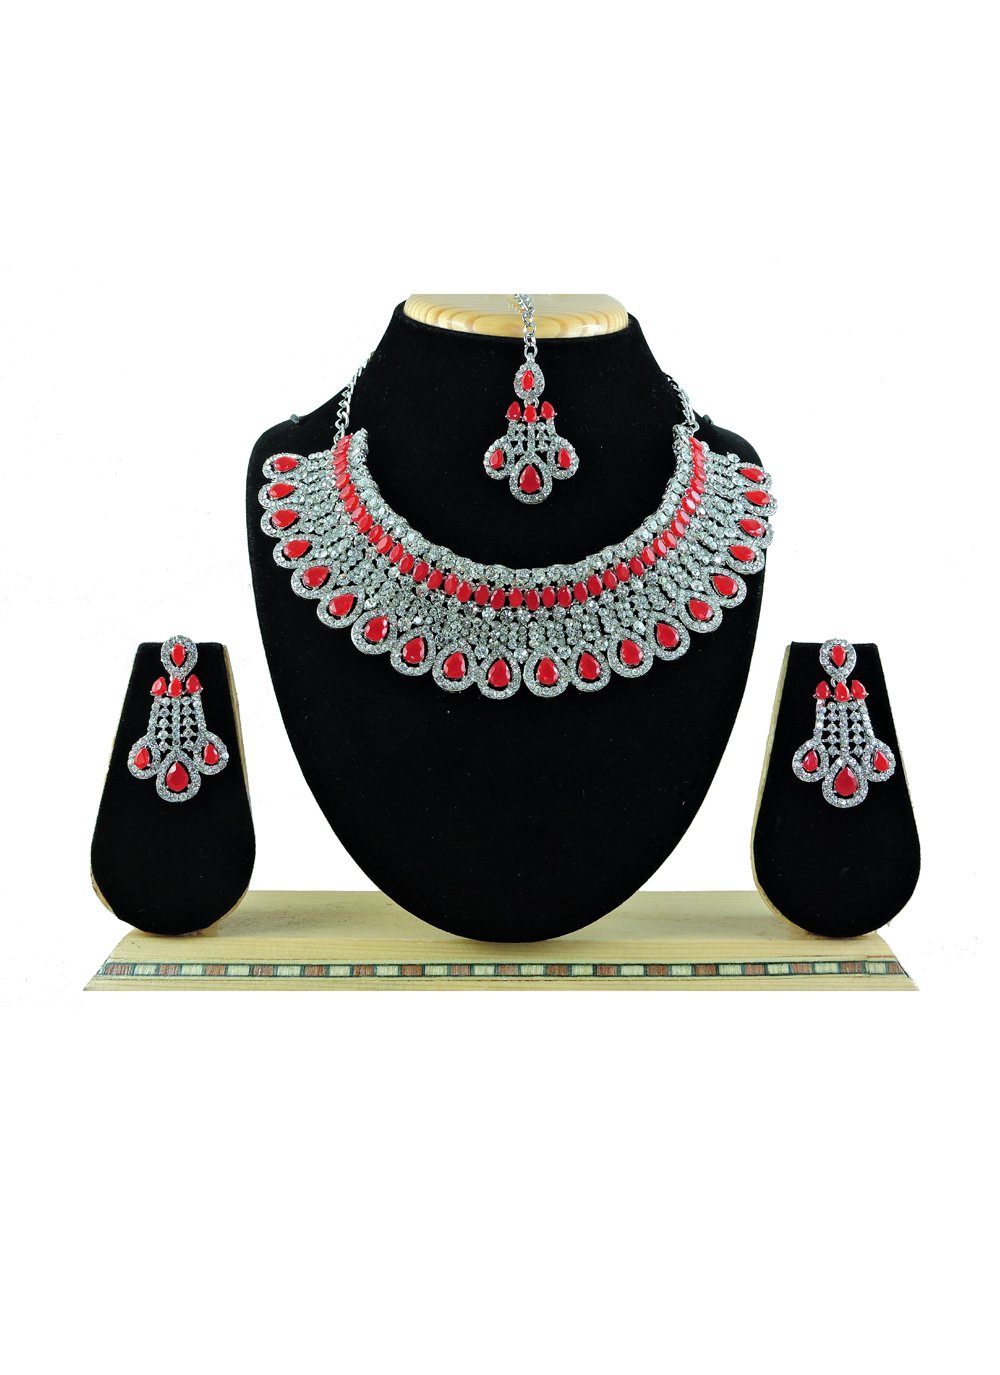 Talismanic Red and White Alloy Necklace Set For Festival